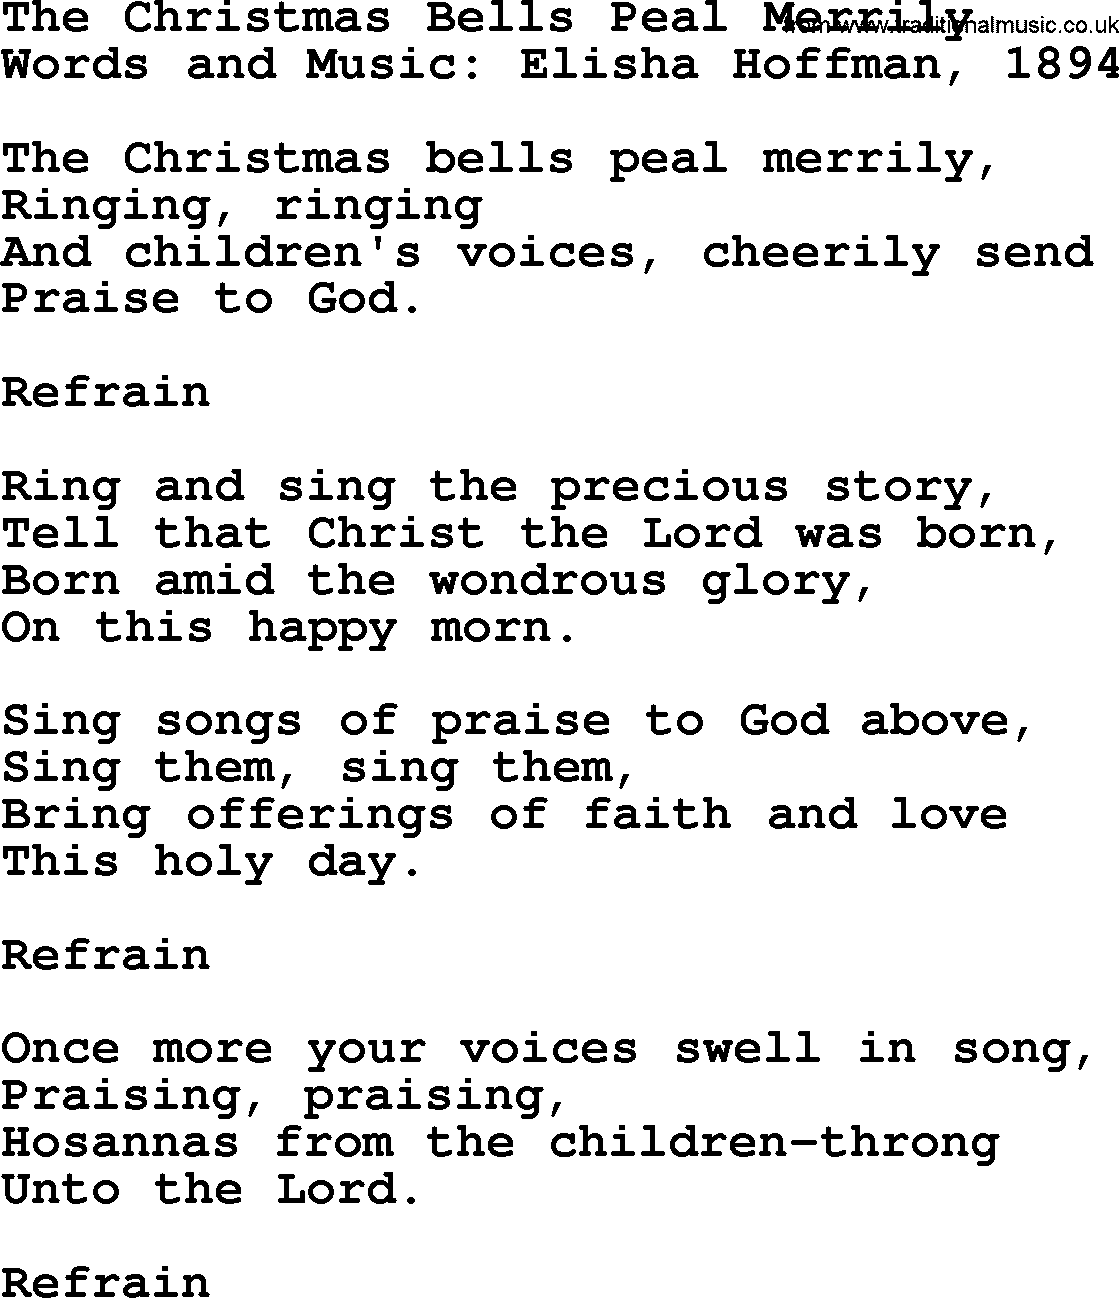 280 Christmas Hymns and songs with PowerPoints and PDF, title: The Christmas Bells Peal Merrily, lyrics, PPT and PDF